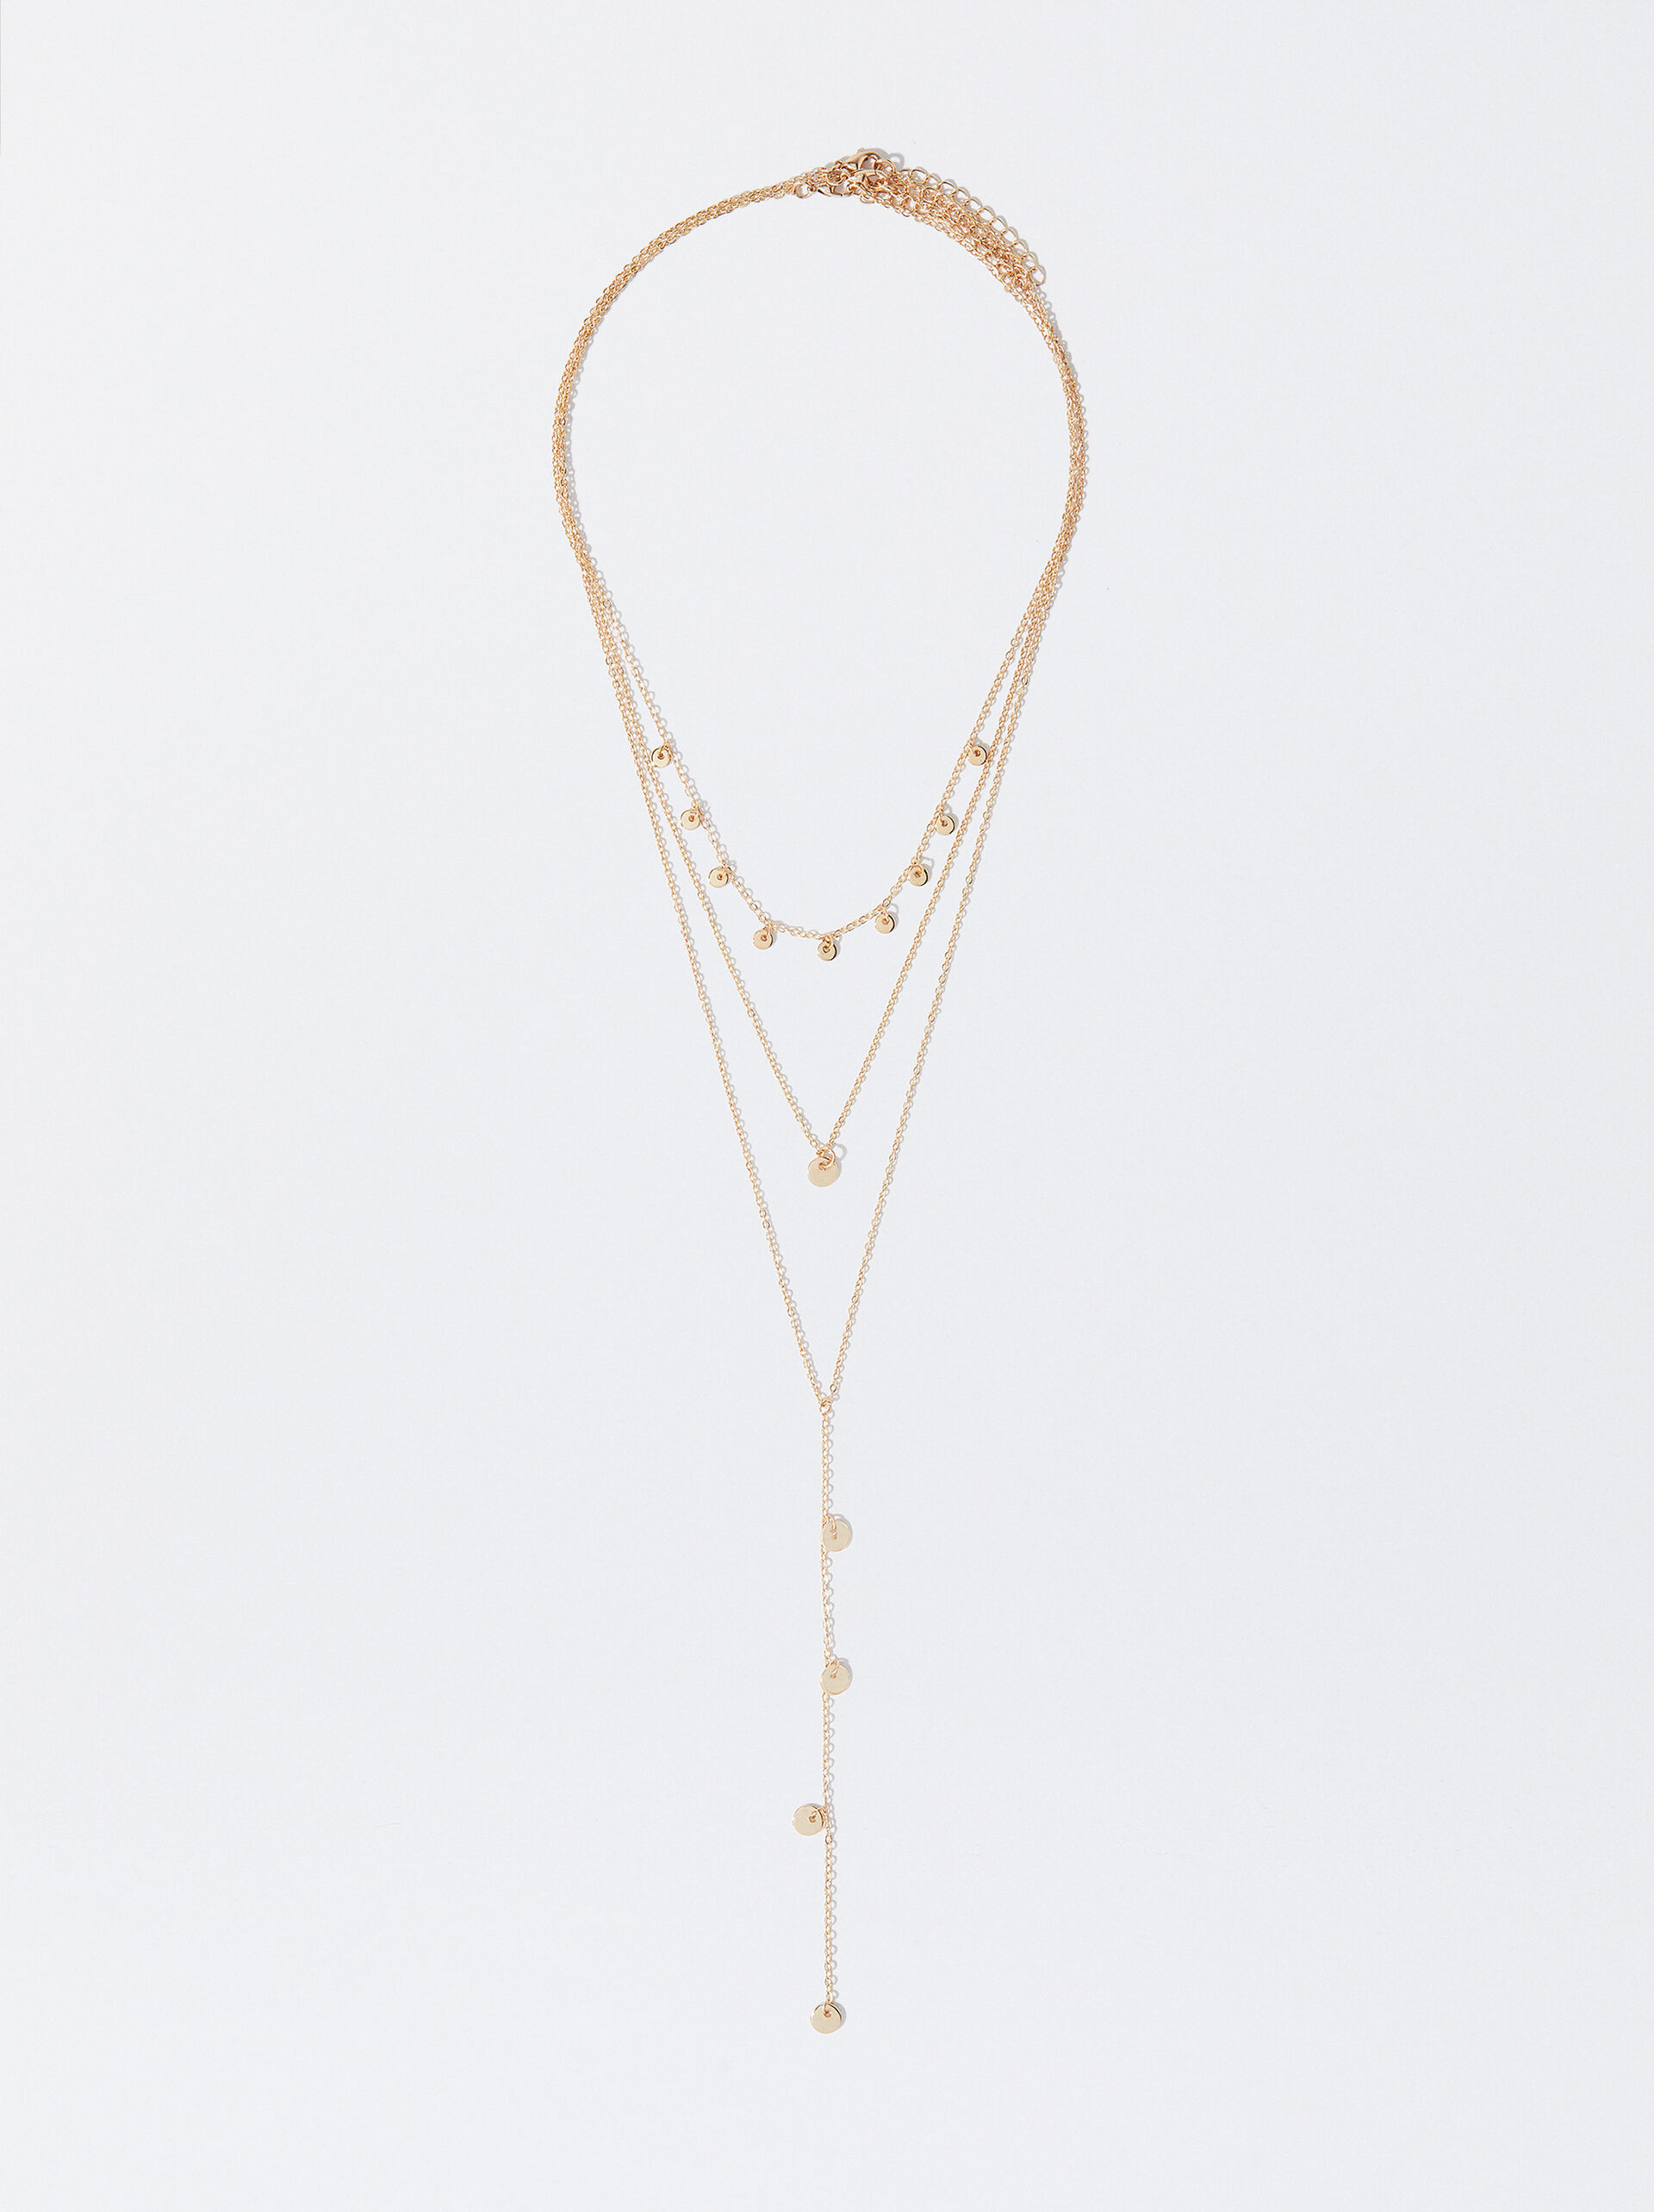 Gold-Toned Necklace With Medallions image number 1.0